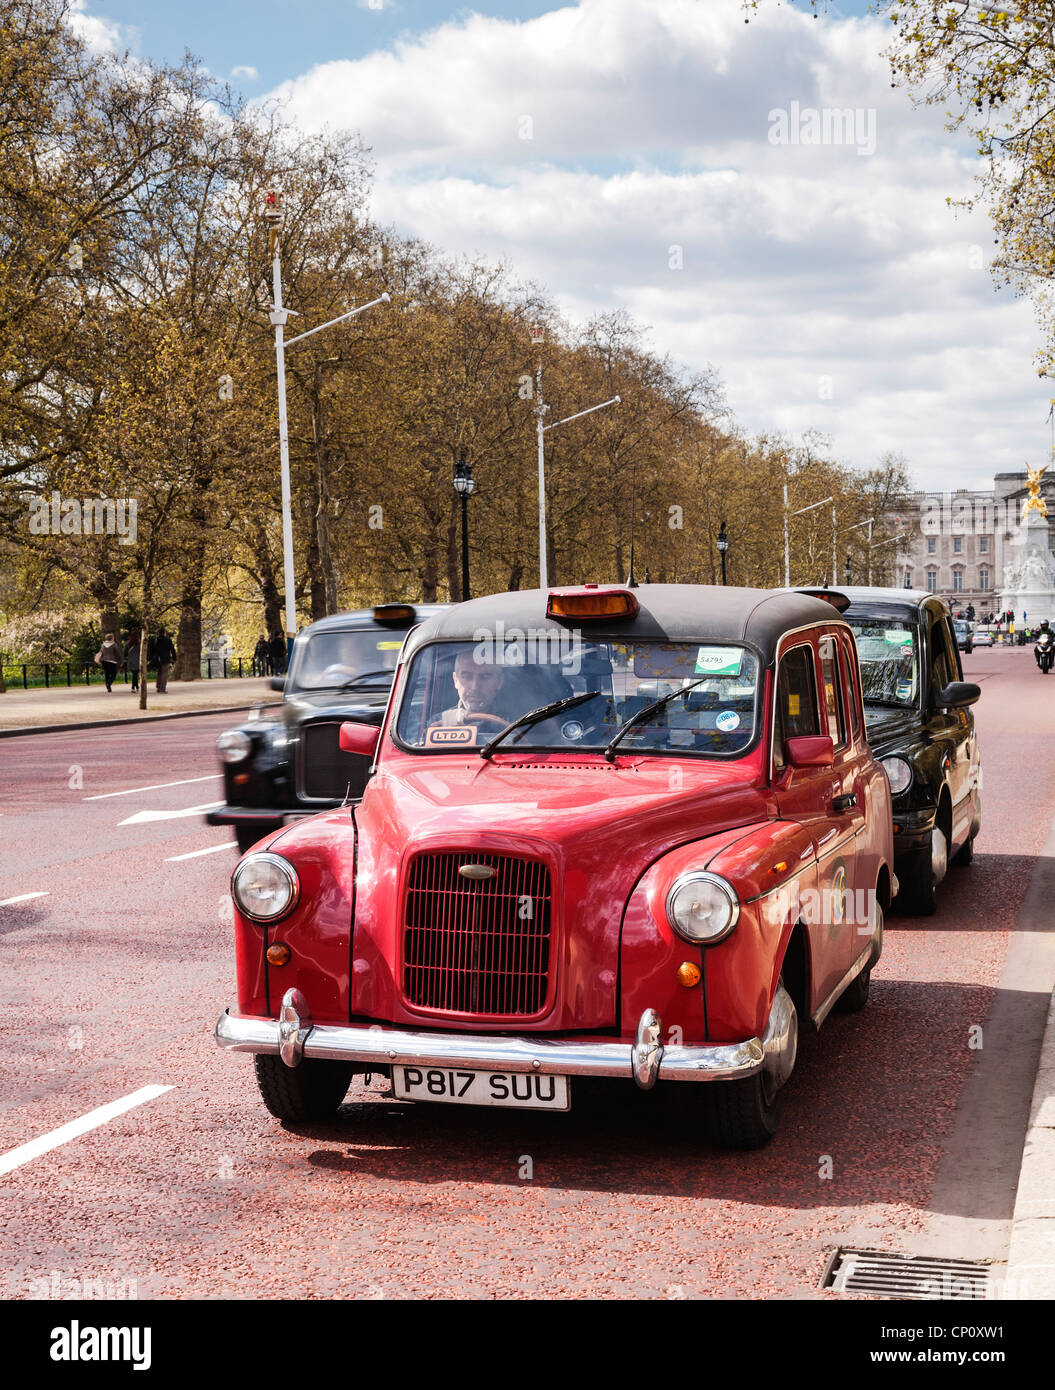 A red London taxi, The Mall, London, England. Stock Photo